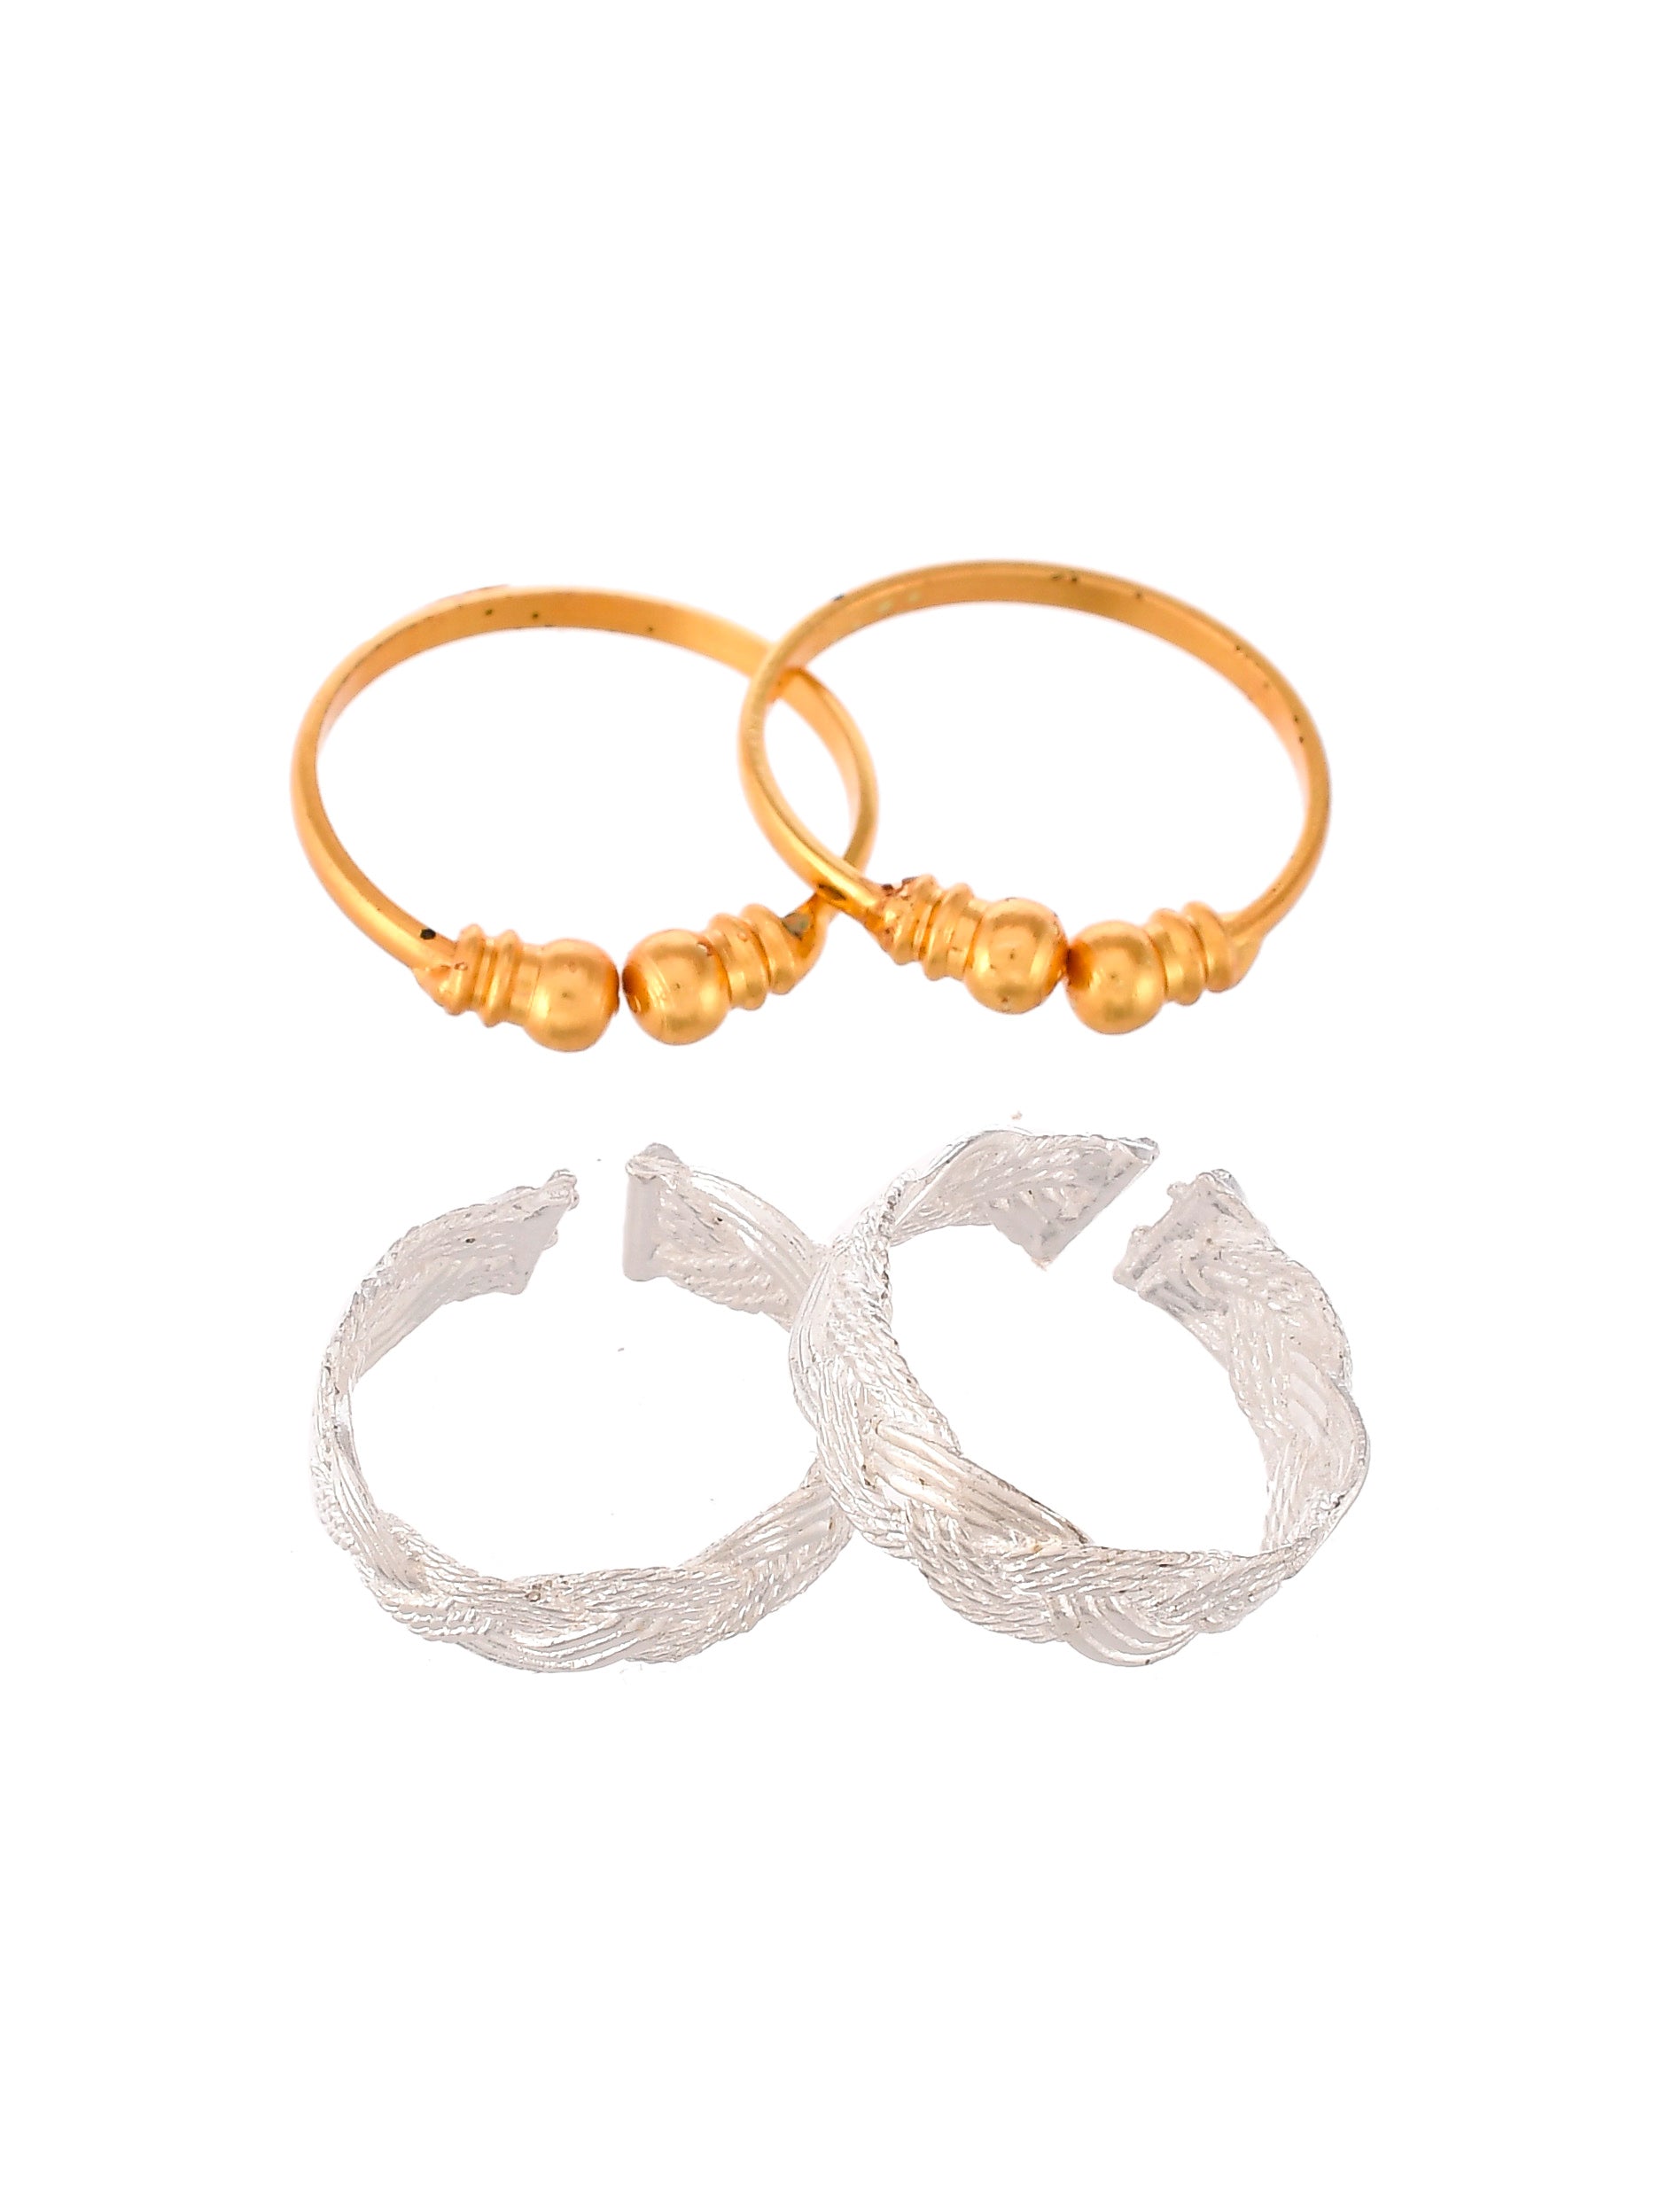 Set of 2 Silver Gold Plated Toe Rings For Women